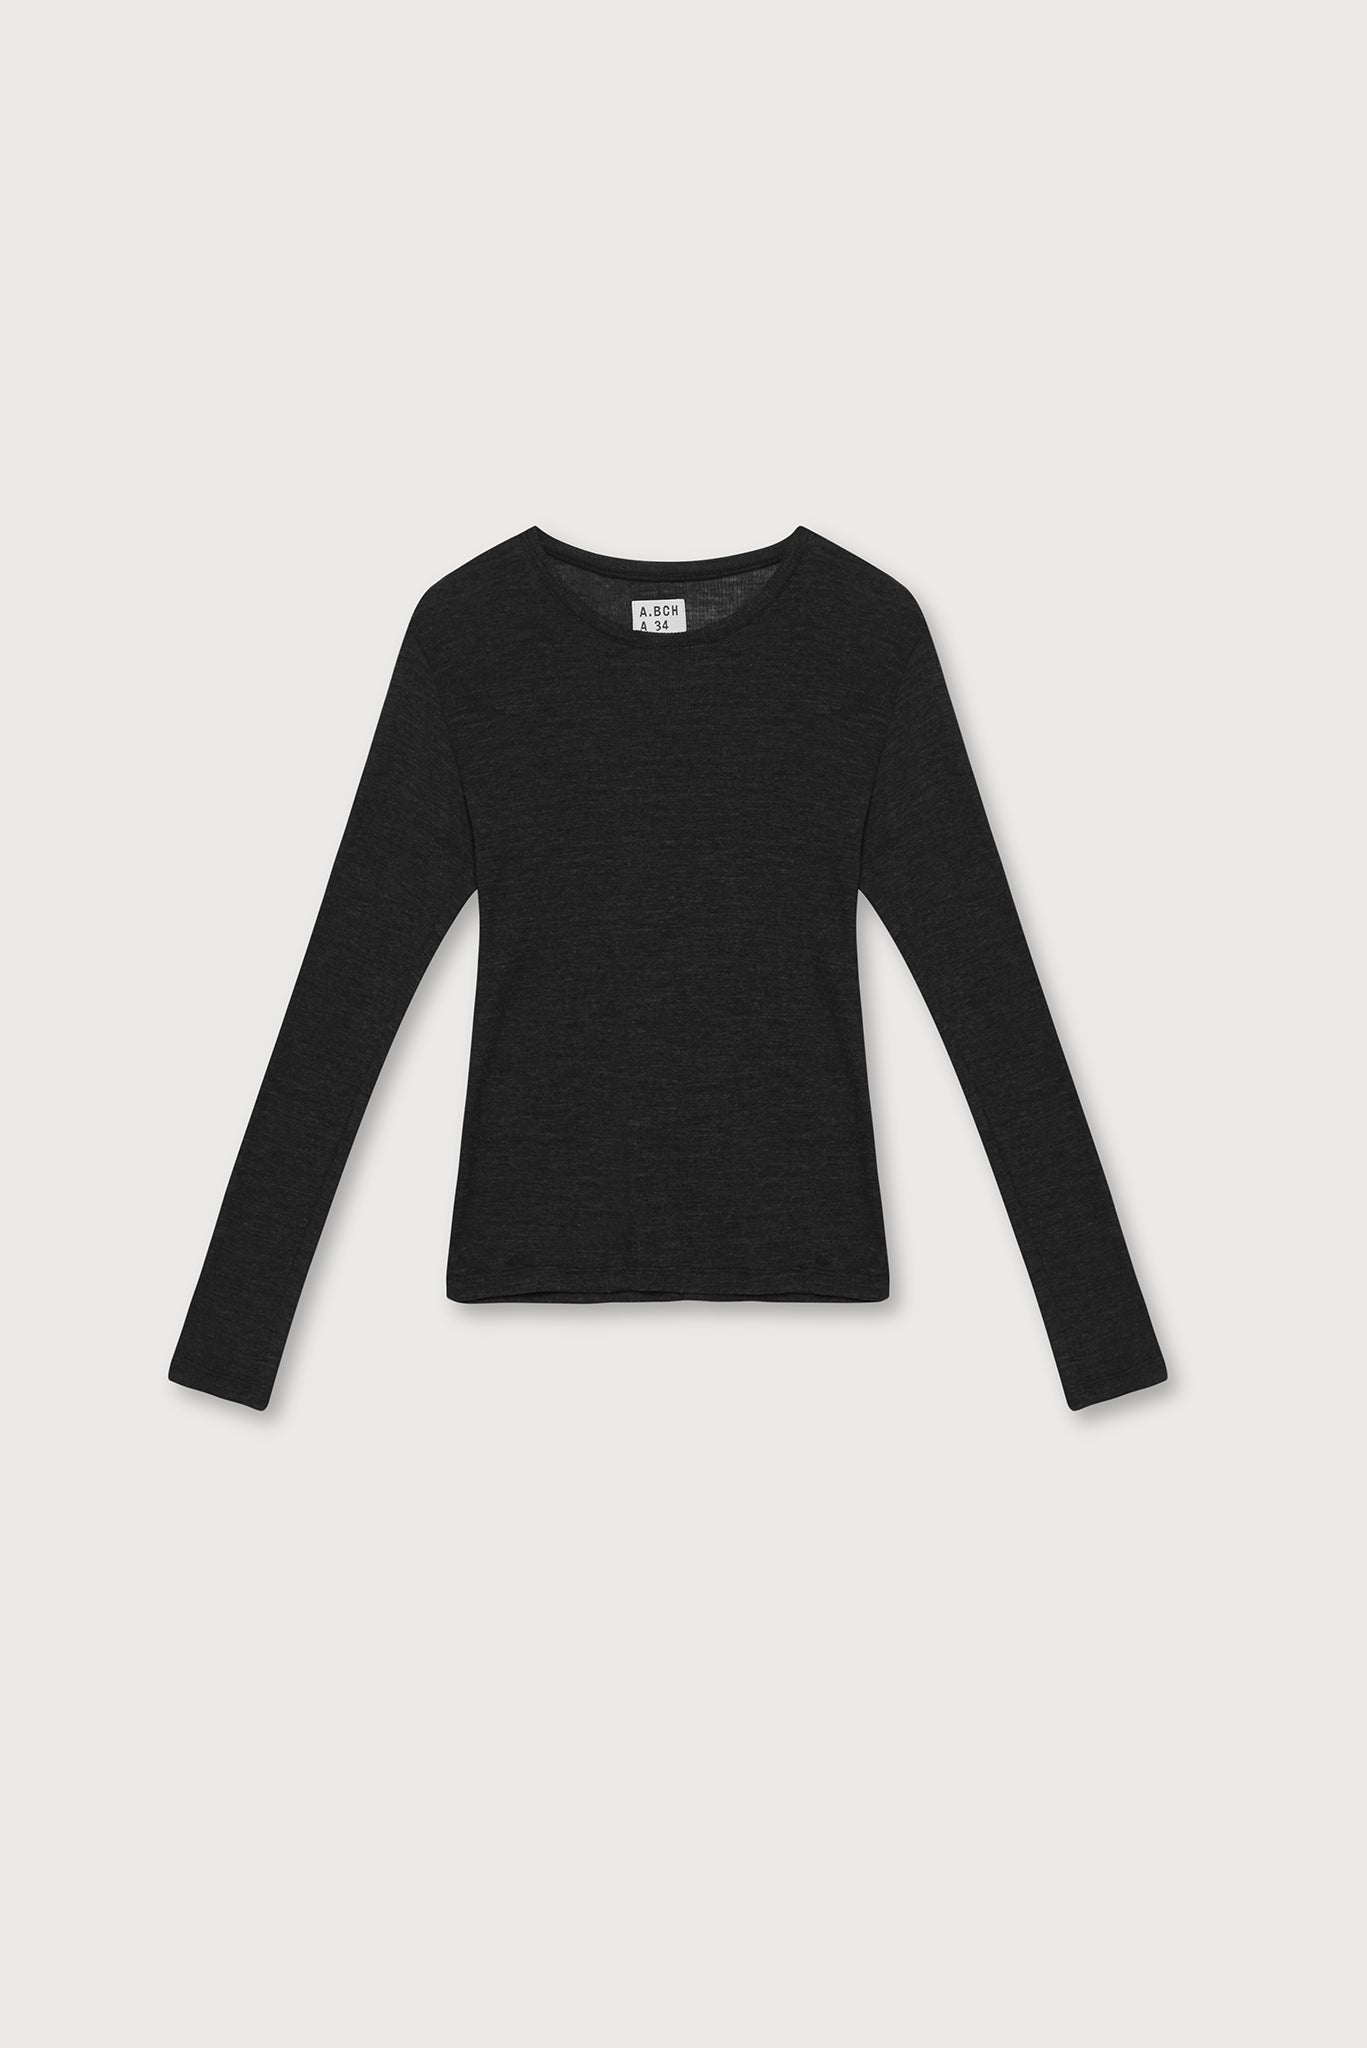 A.BCH A.34 Charcoal Long Sleeve Thermal T-Shirt in Australian Merino